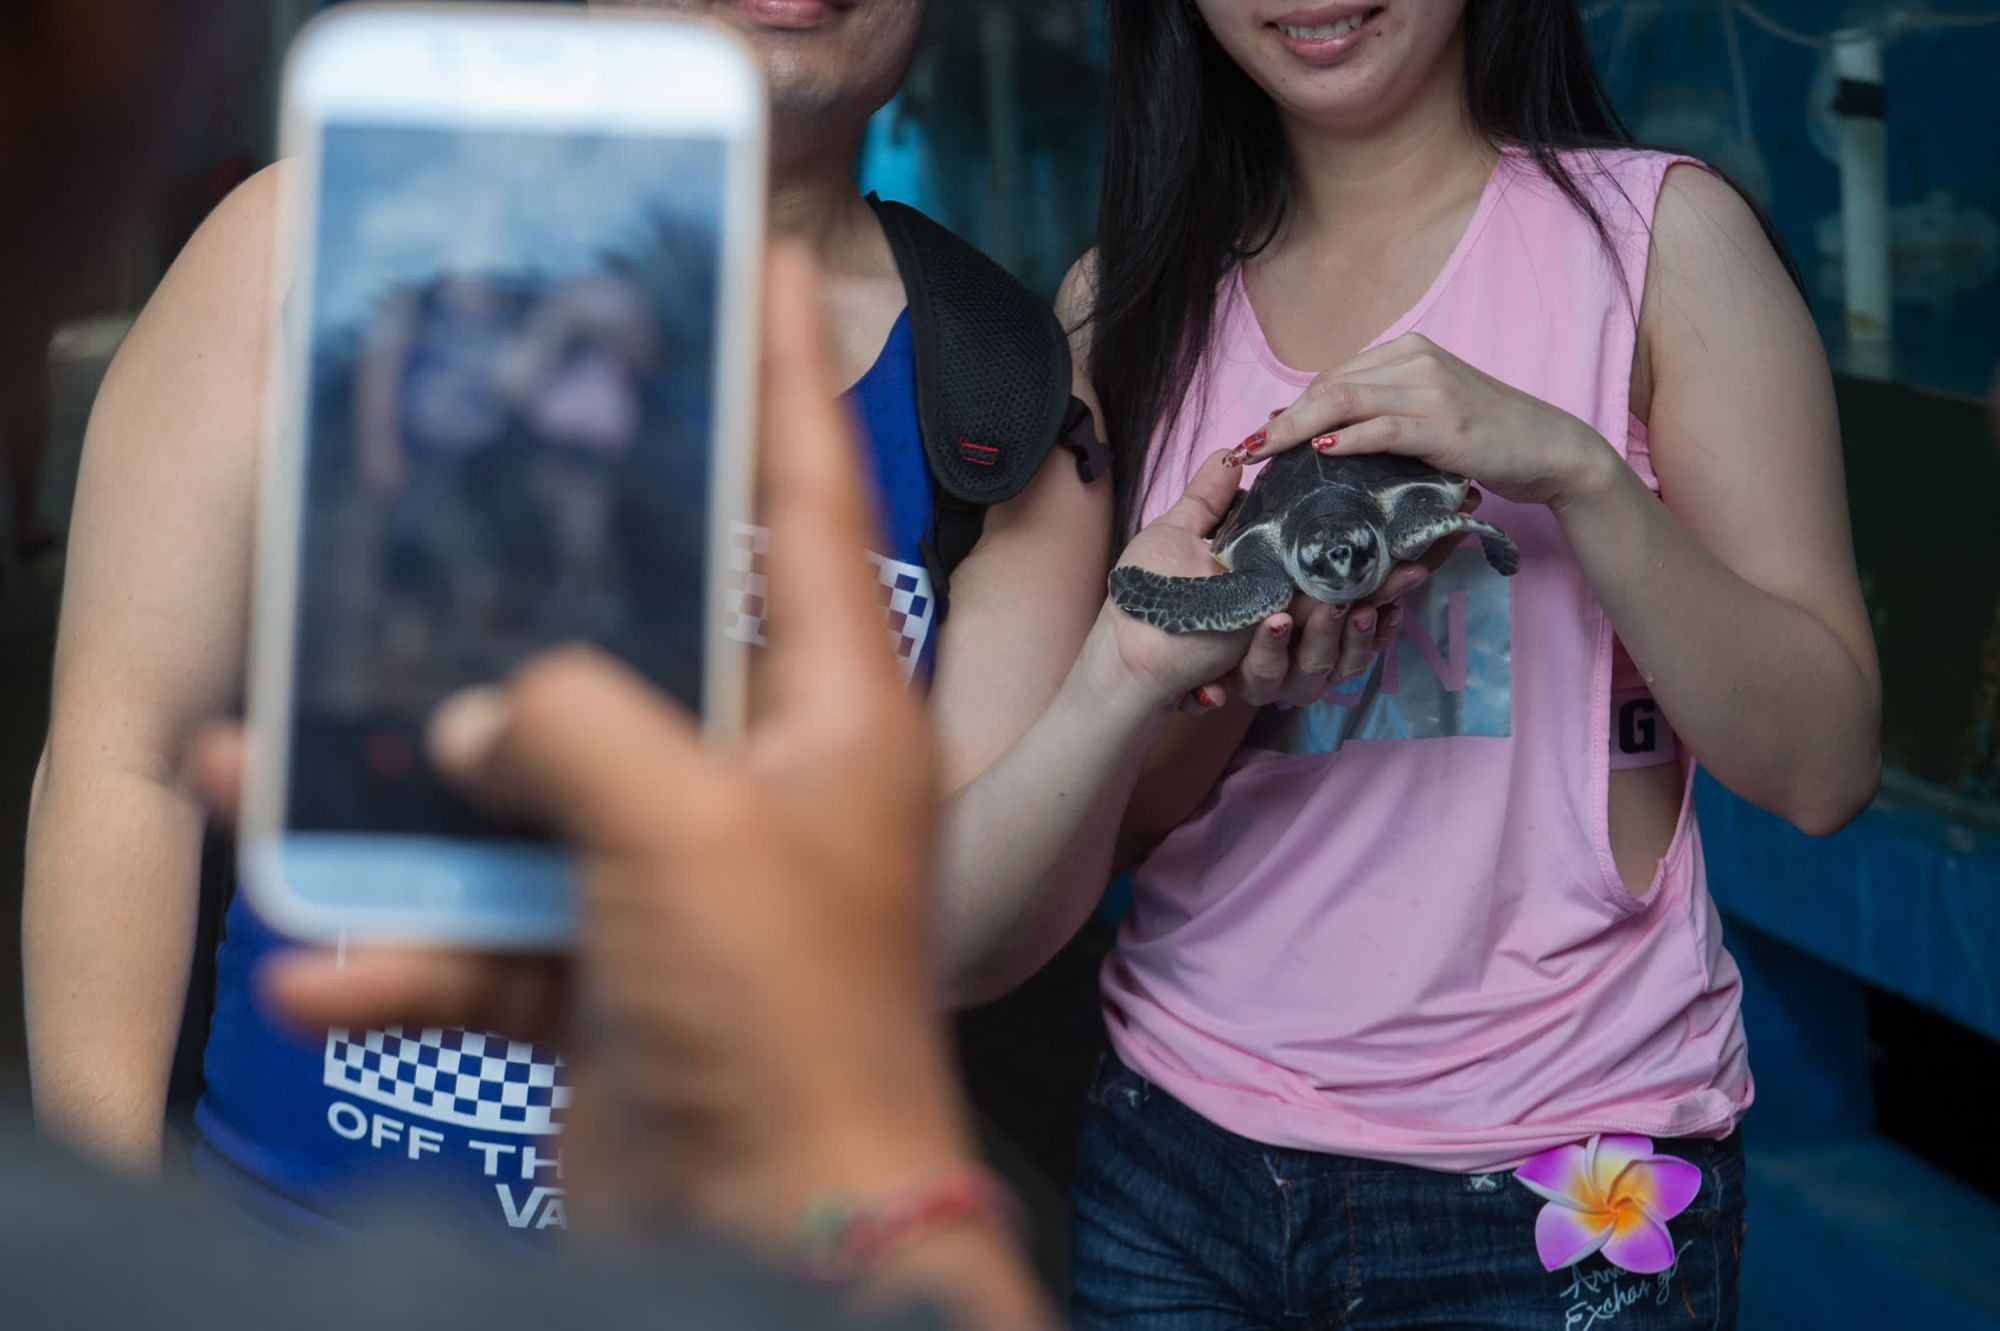 An turtle forced to pose with tourists